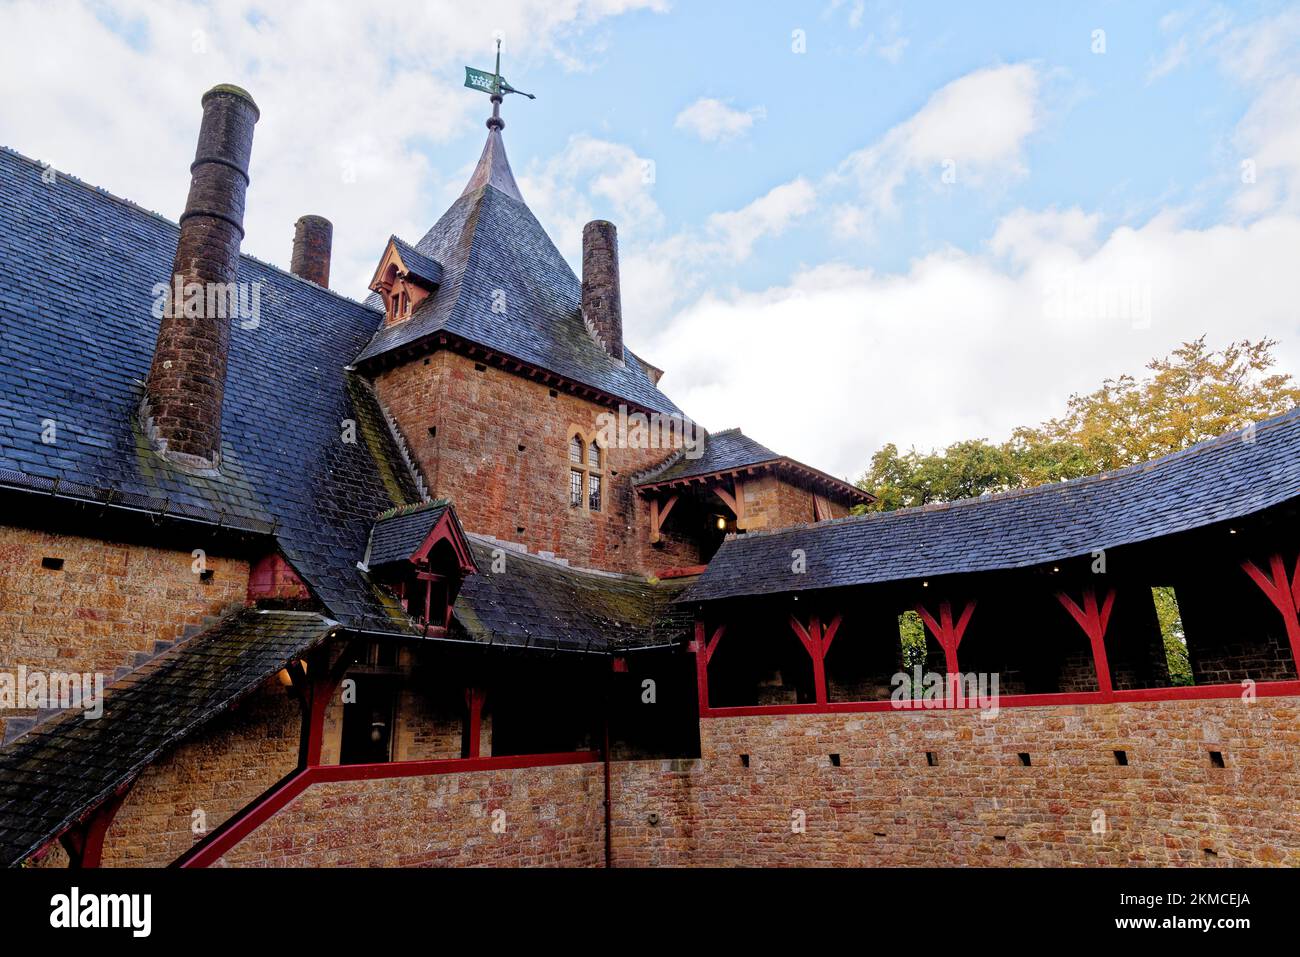 Castell Coch or Castle Coch - The Red Castle, Tongwynlais, Cardiff, Wales, United Kingdom, Europe - 15th of October 2022 Stock Photo